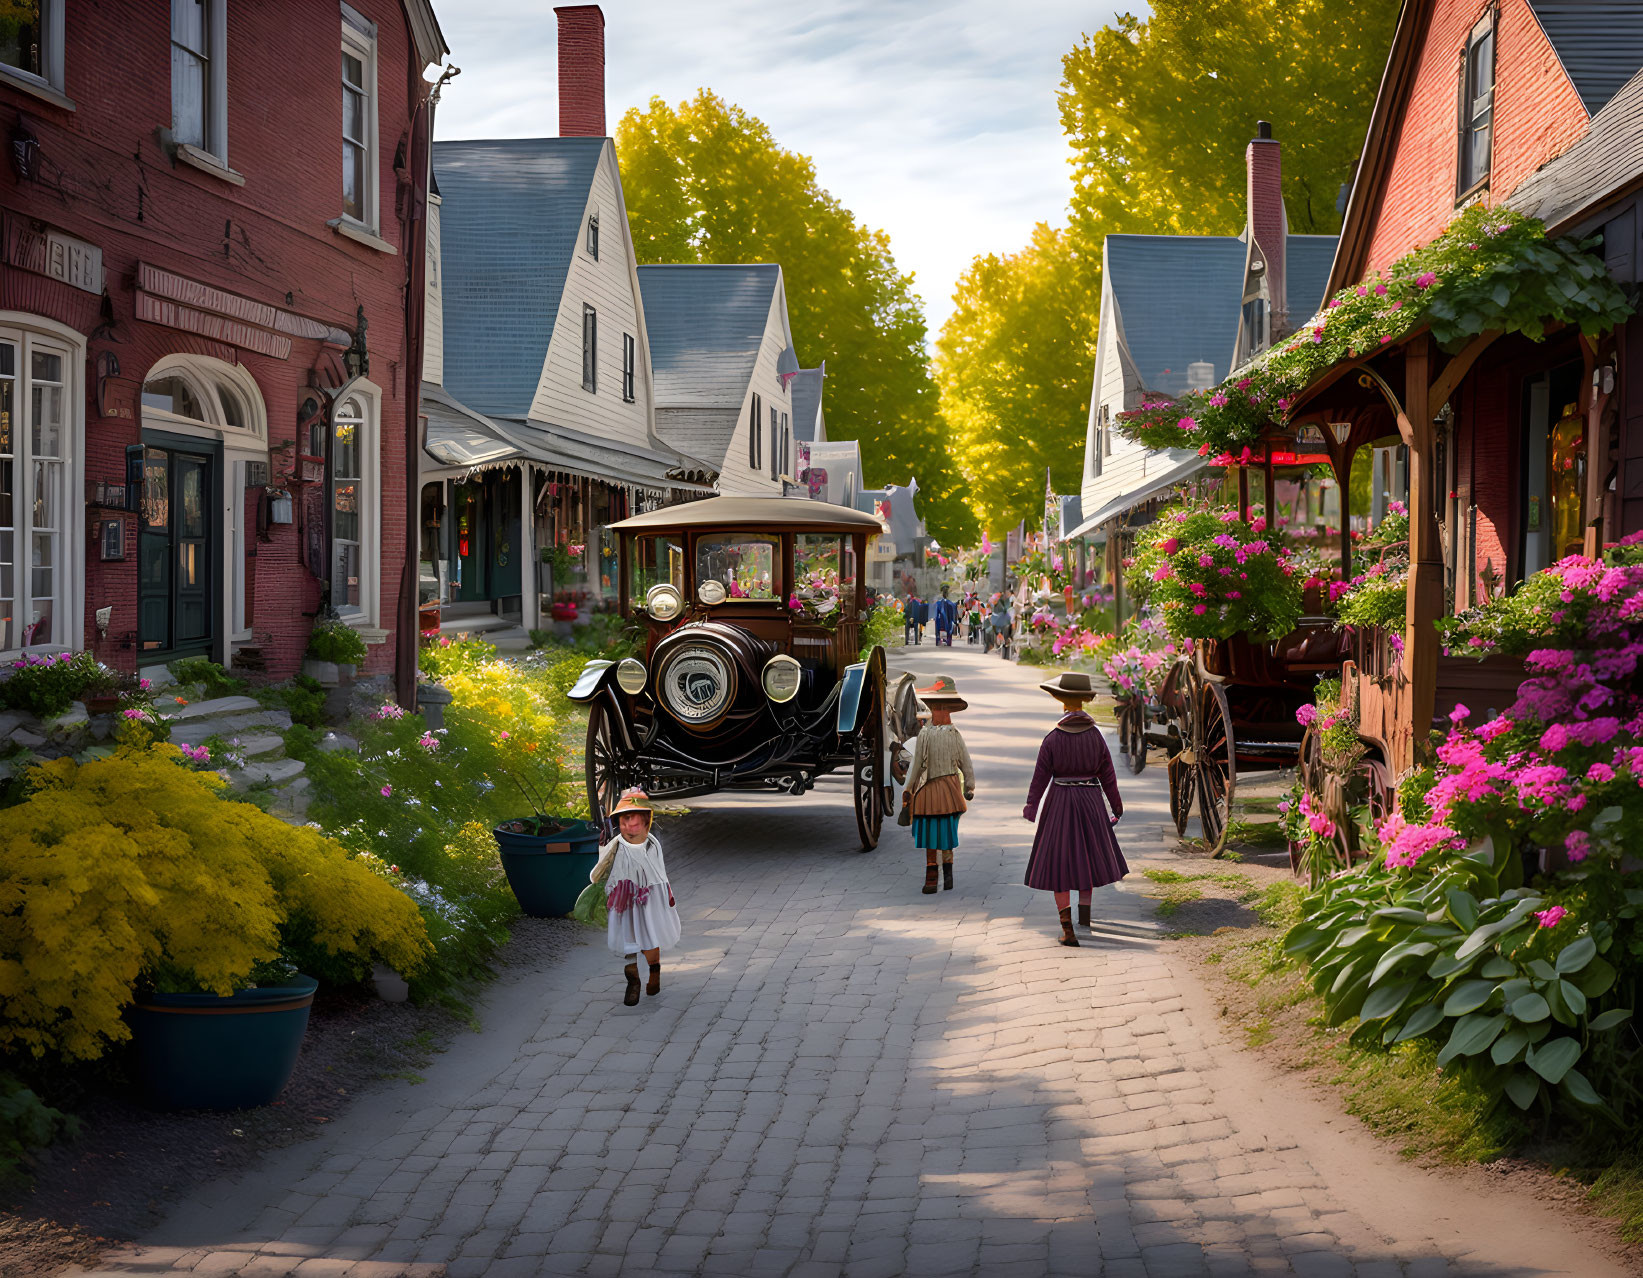 Vintage street scene with people in period costumes, vintage car, horse-drawn cart, vibrant flowers,